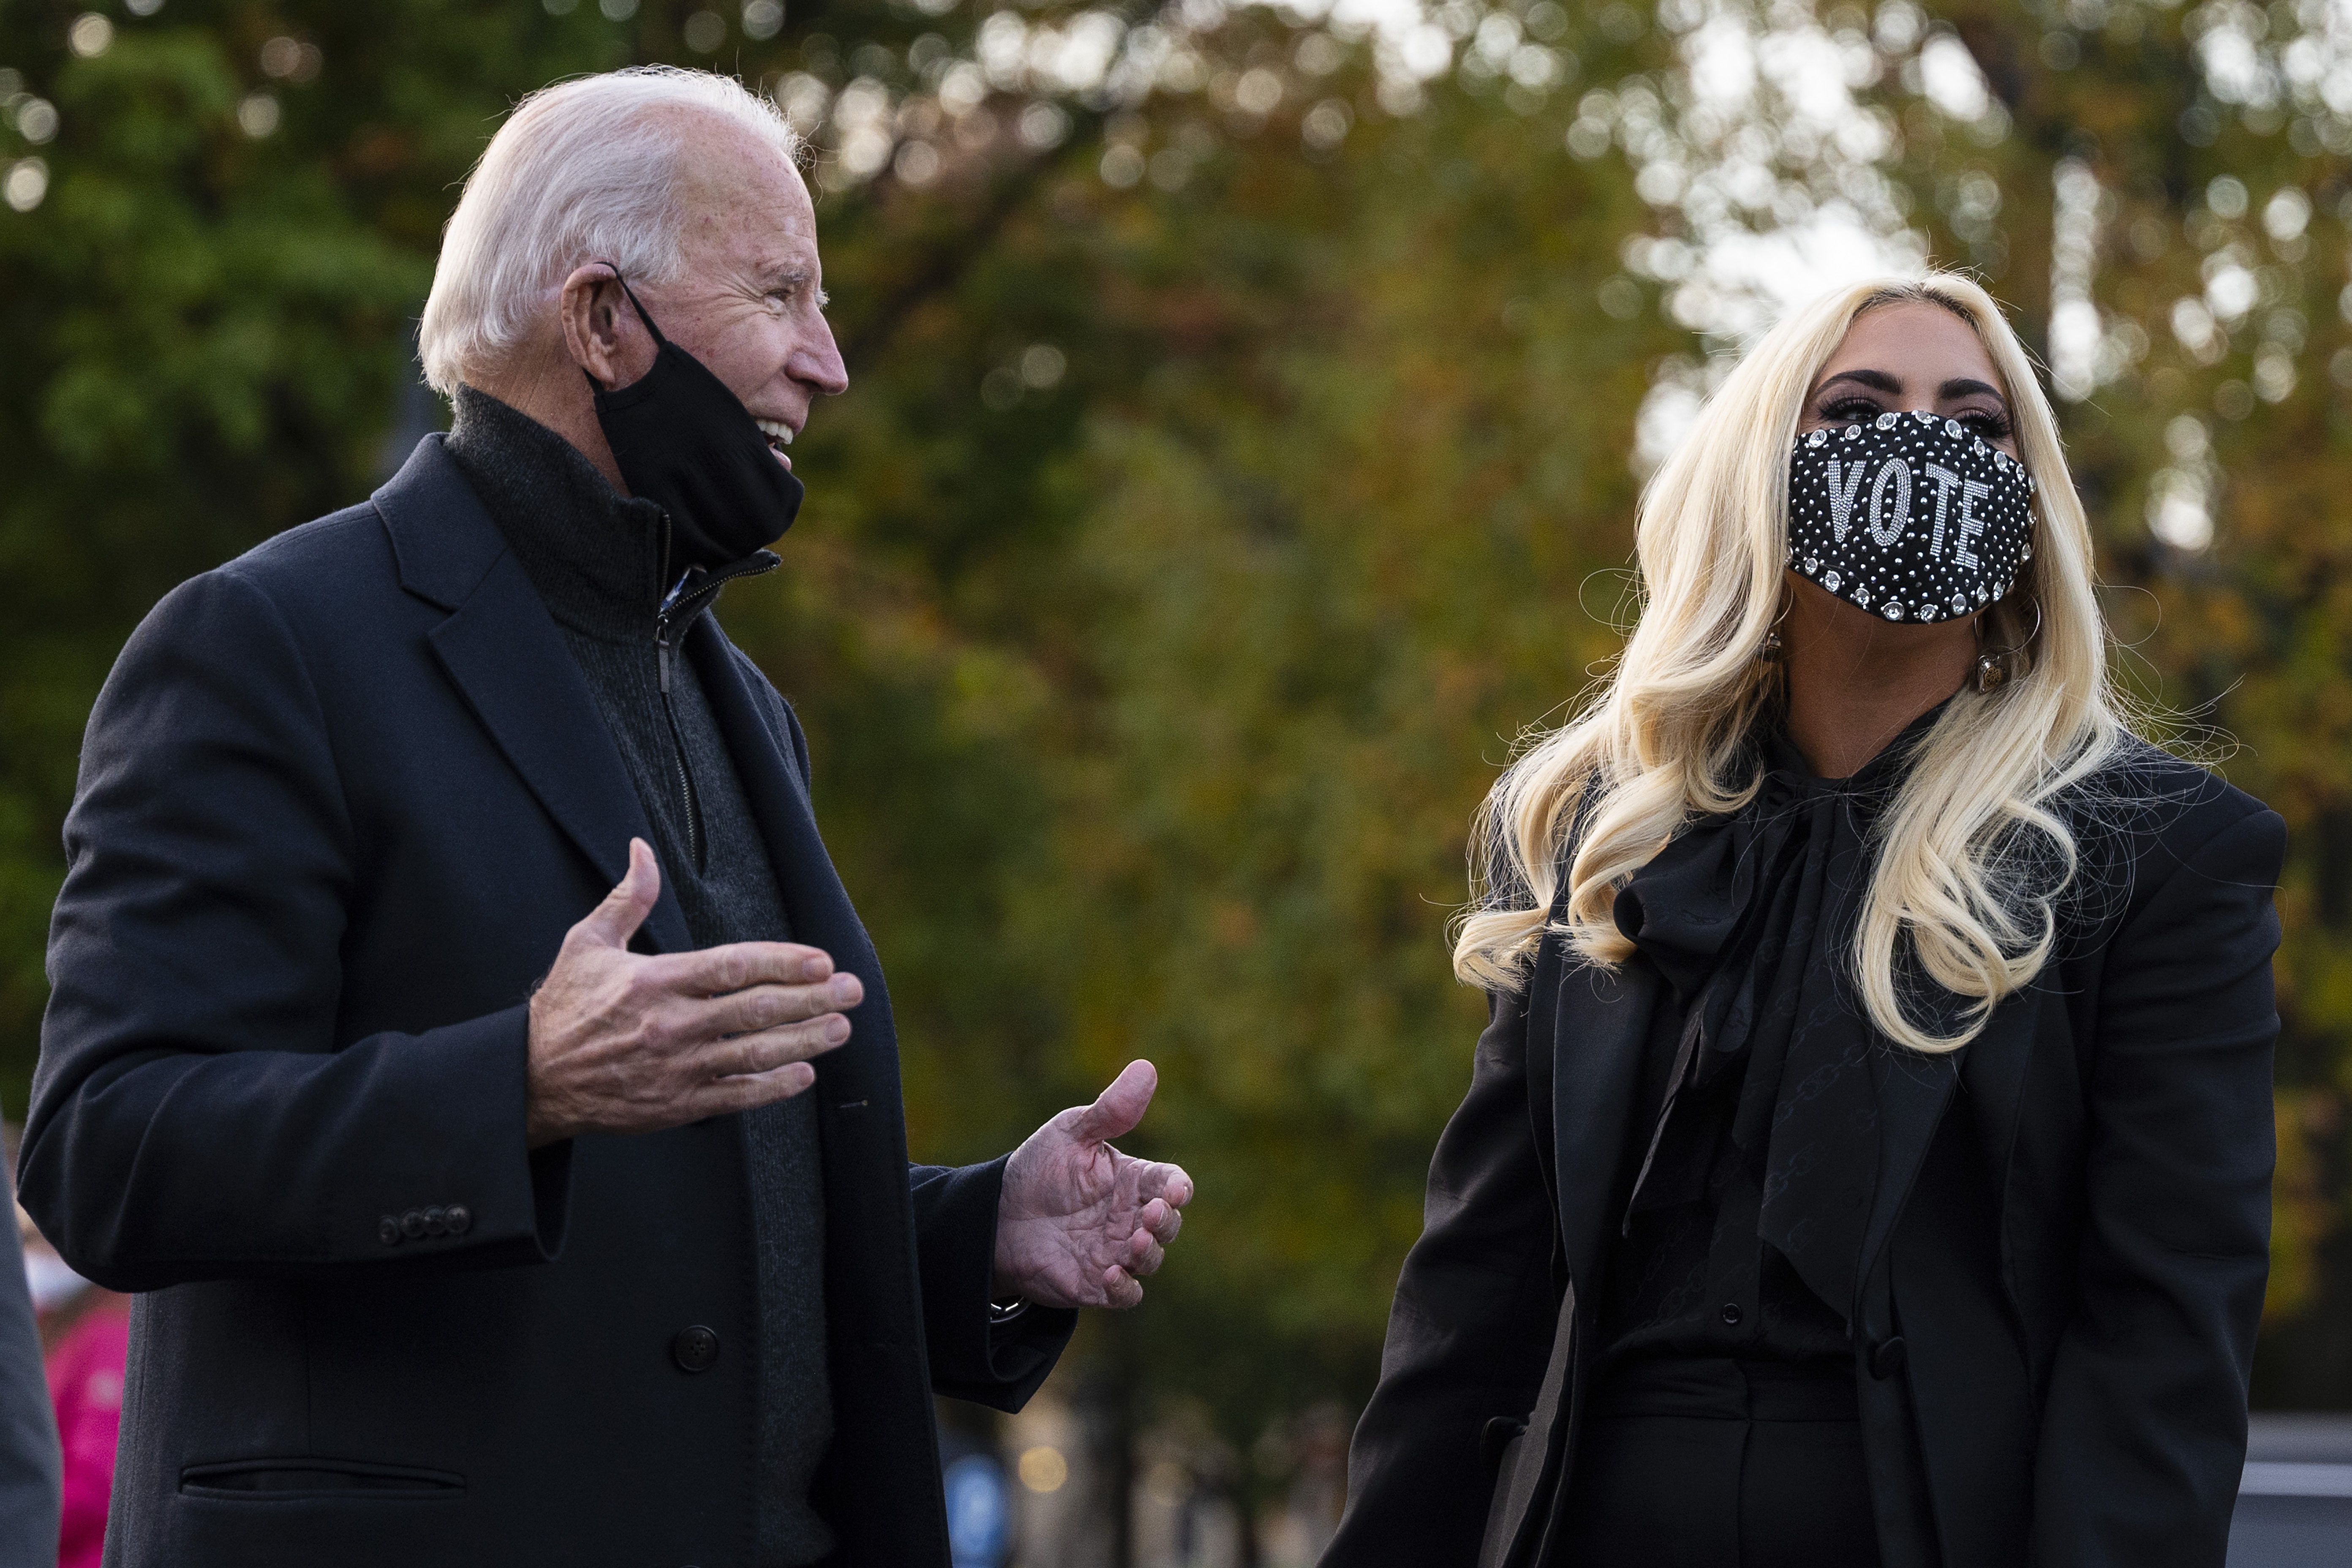 Democratic presidential candidate Joe Biden speaks with Lady Gaga before a drive-in rally in Pittsburgh, Pennsylvania on November 2